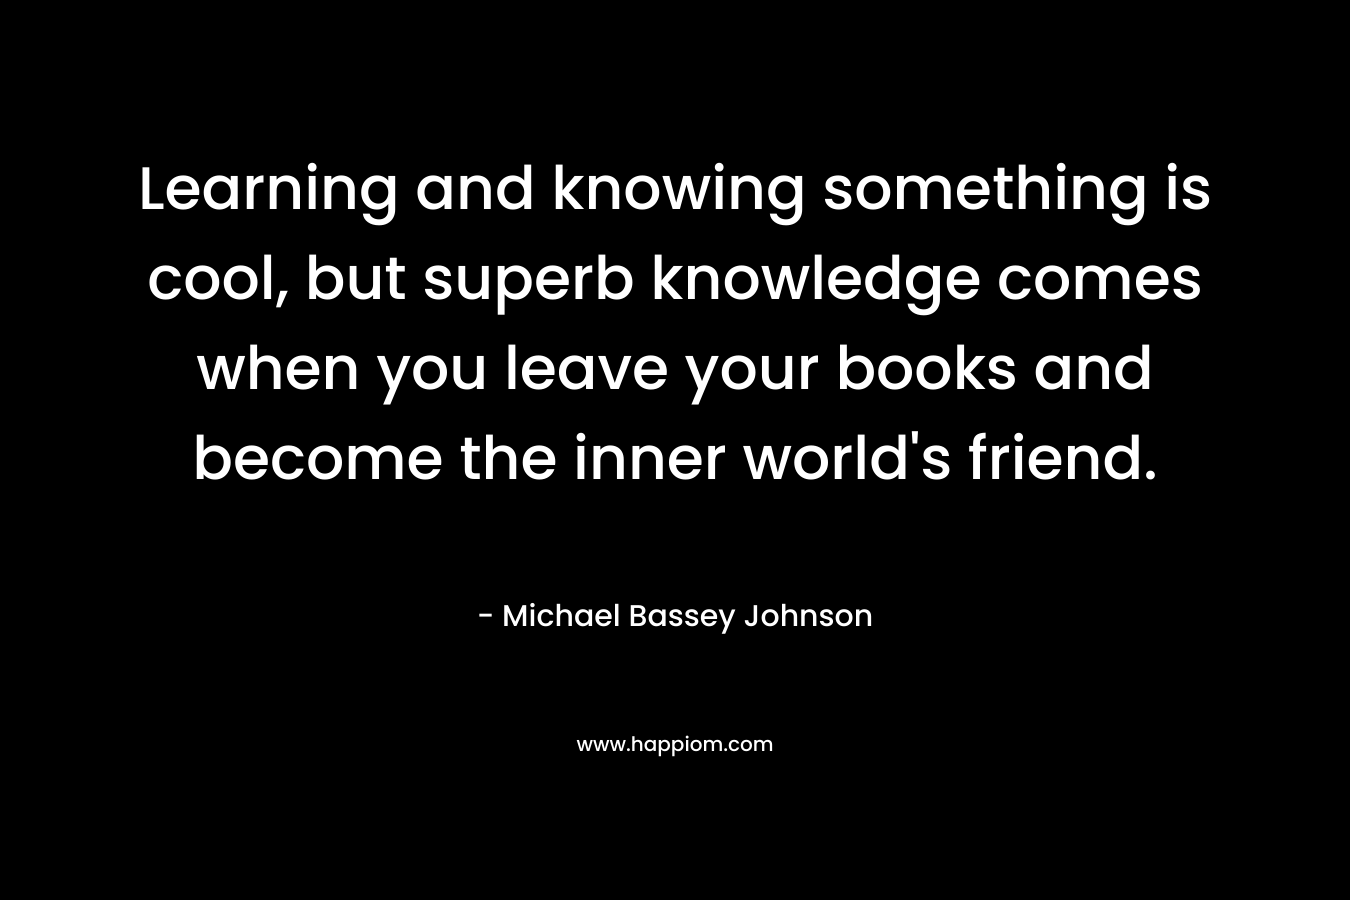 Learning and knowing something is cool, but superb knowledge comes when you leave your books and become the inner world's friend.